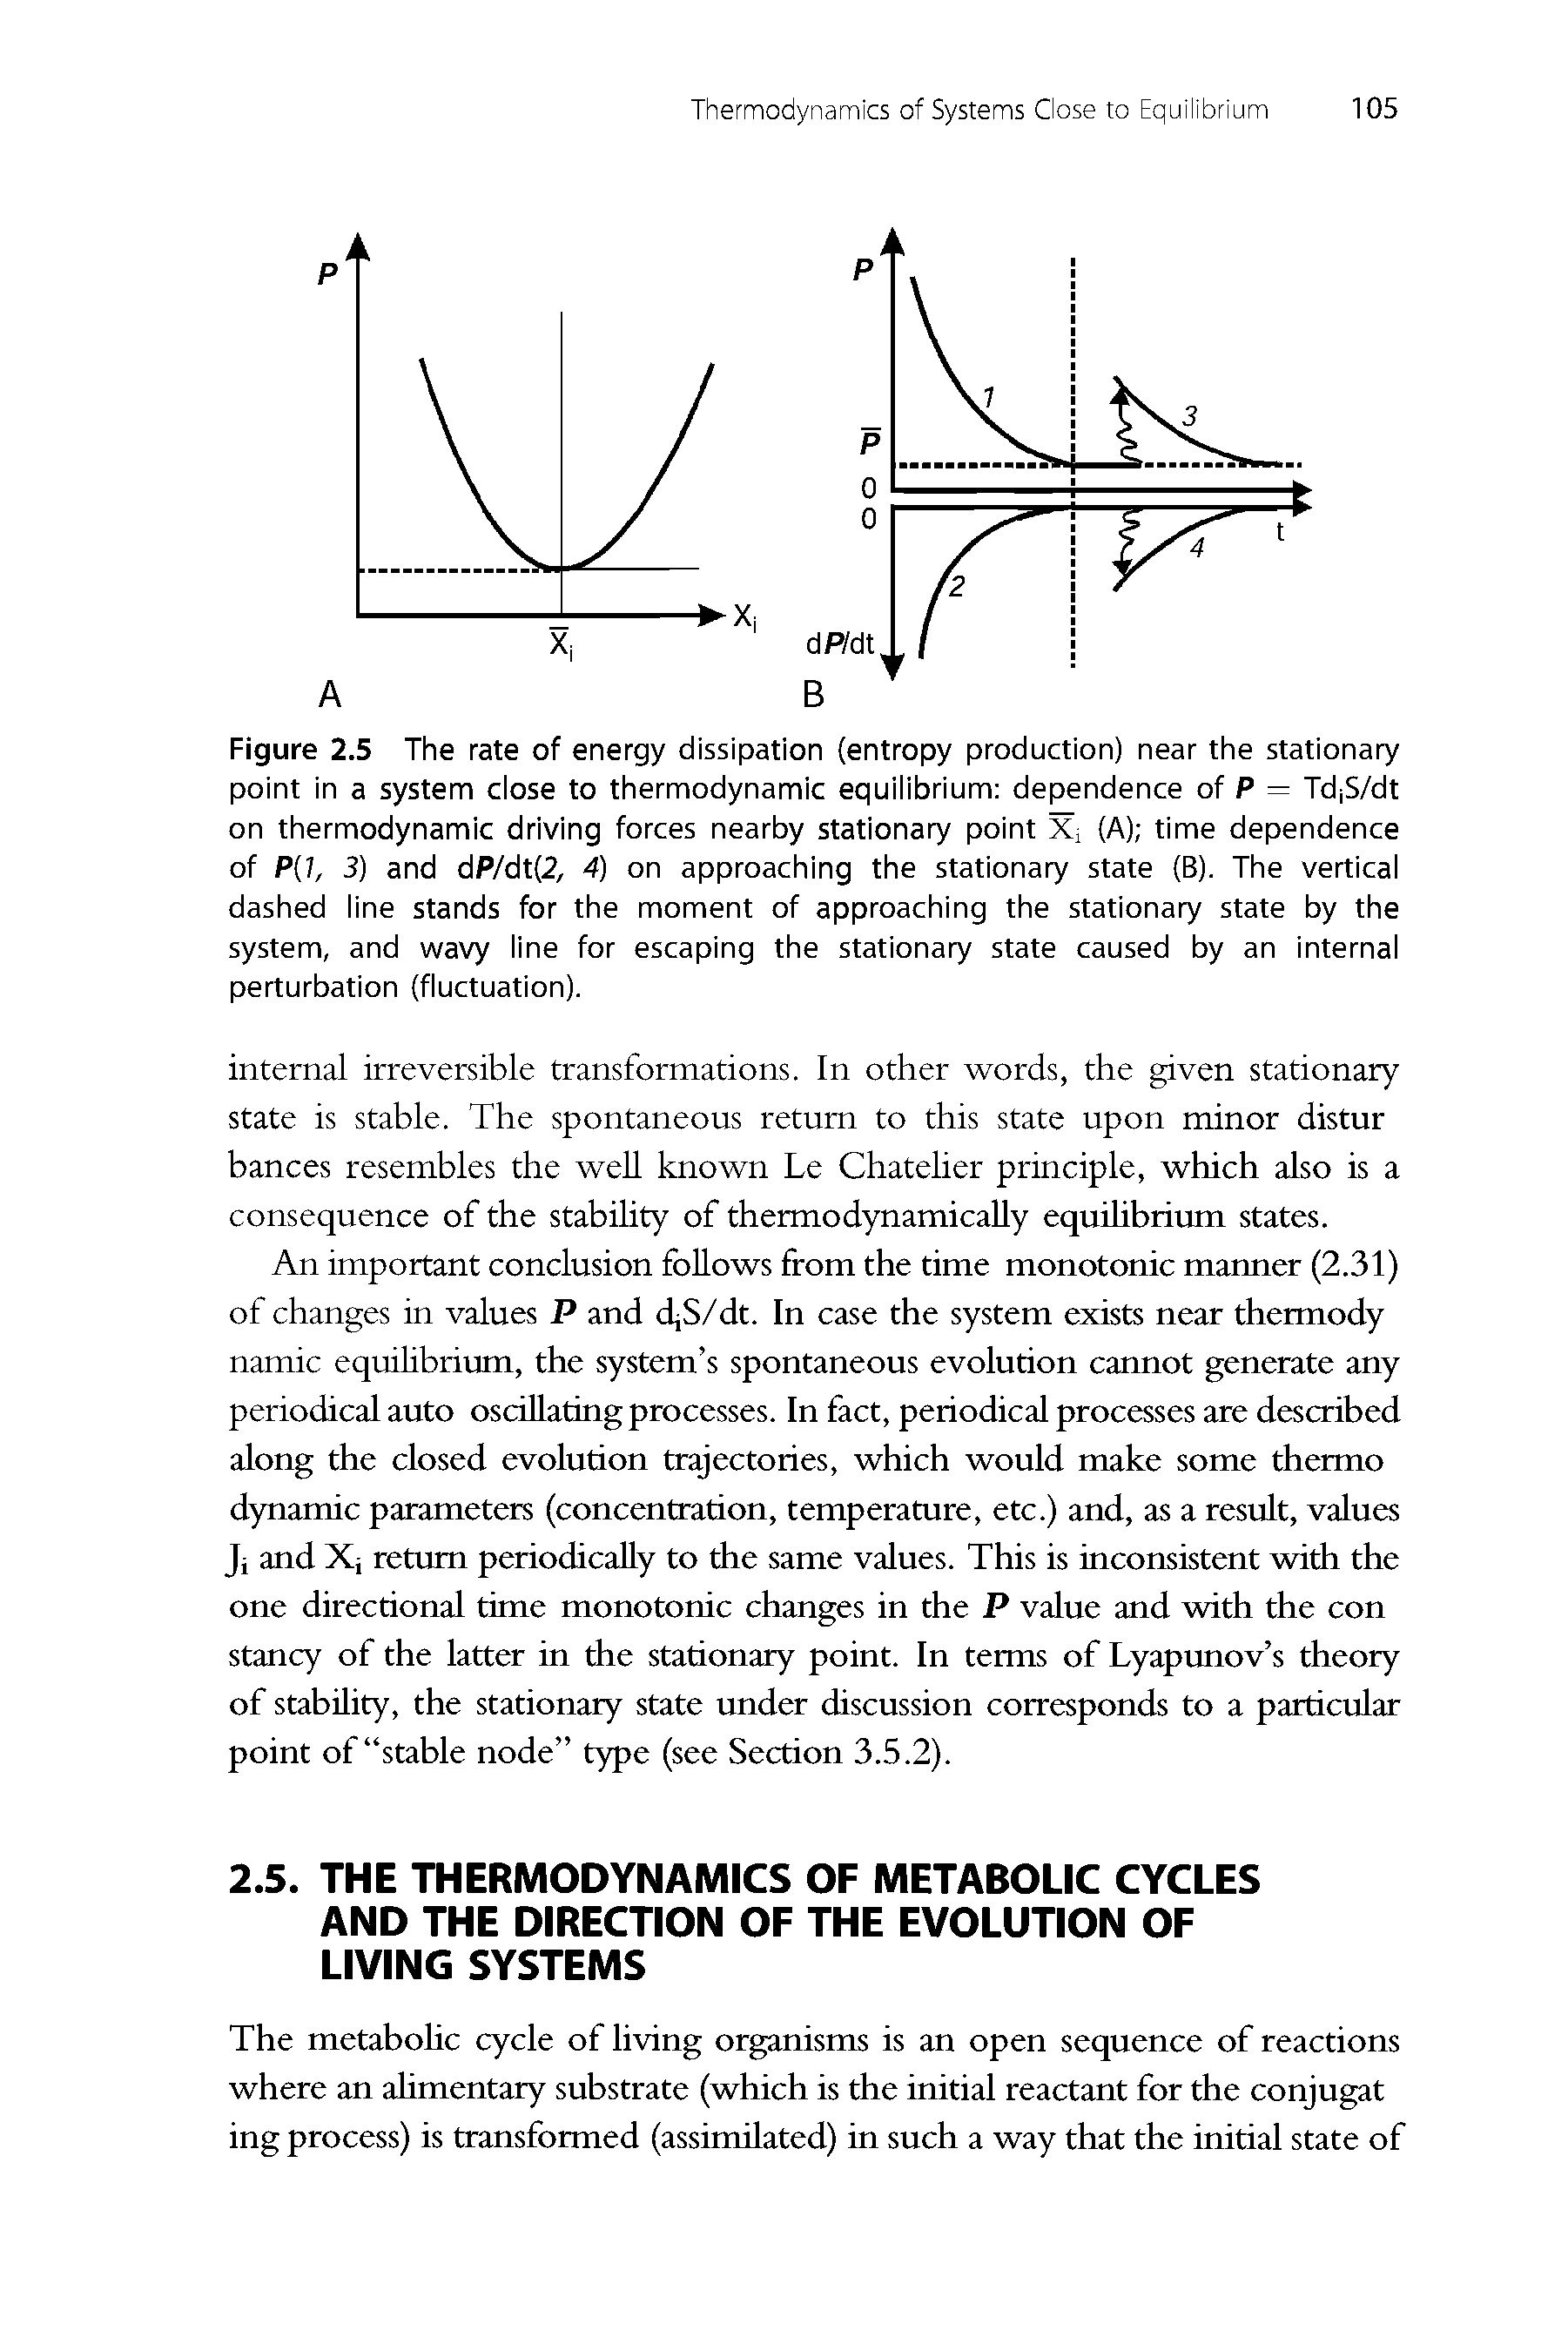 Figure 2.5 The rate of energy dissipation (entropy production) near the stationary point in a system close to thermodynamic equilibrium dependence of P = Td S/dt on thermodynamic driving forces nearby stationary point Xj (A) time dependence of P(7, 3) and dP/dt 2, 4) on approaching the stationary state (B). The vertical dashed line stands for the moment of approaching the stationary state by the system, and wavy line for escaping the stationary state caused by an internal perturbation (fluctuation).